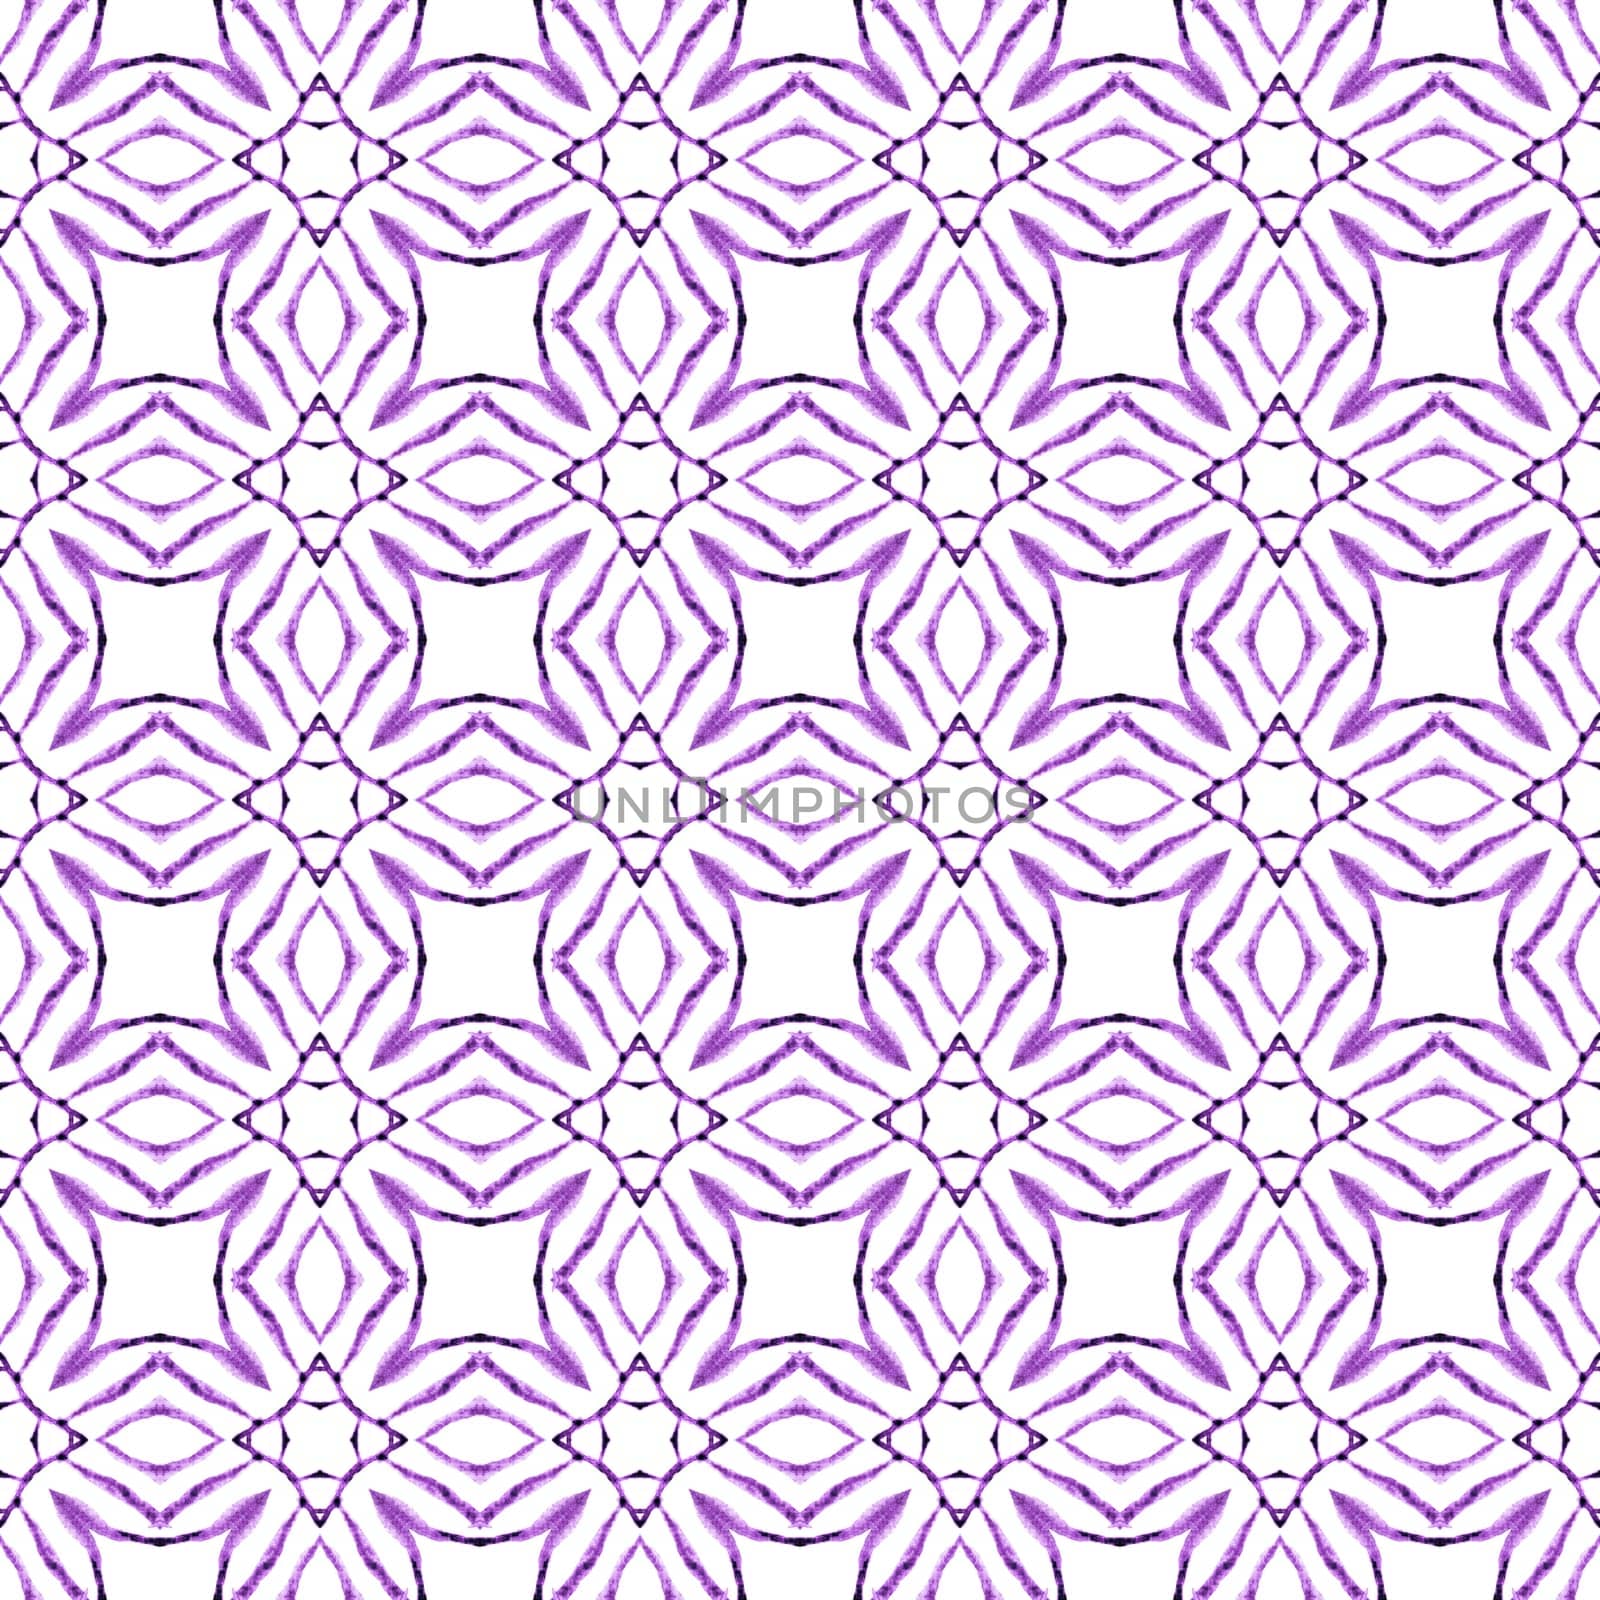 Watercolor ikat repeating tile border. Purple outstanding boho chic summer design. Textile ready juicy print, swimwear fabric, wallpaper, wrapping. Ikat repeating swimwear design.